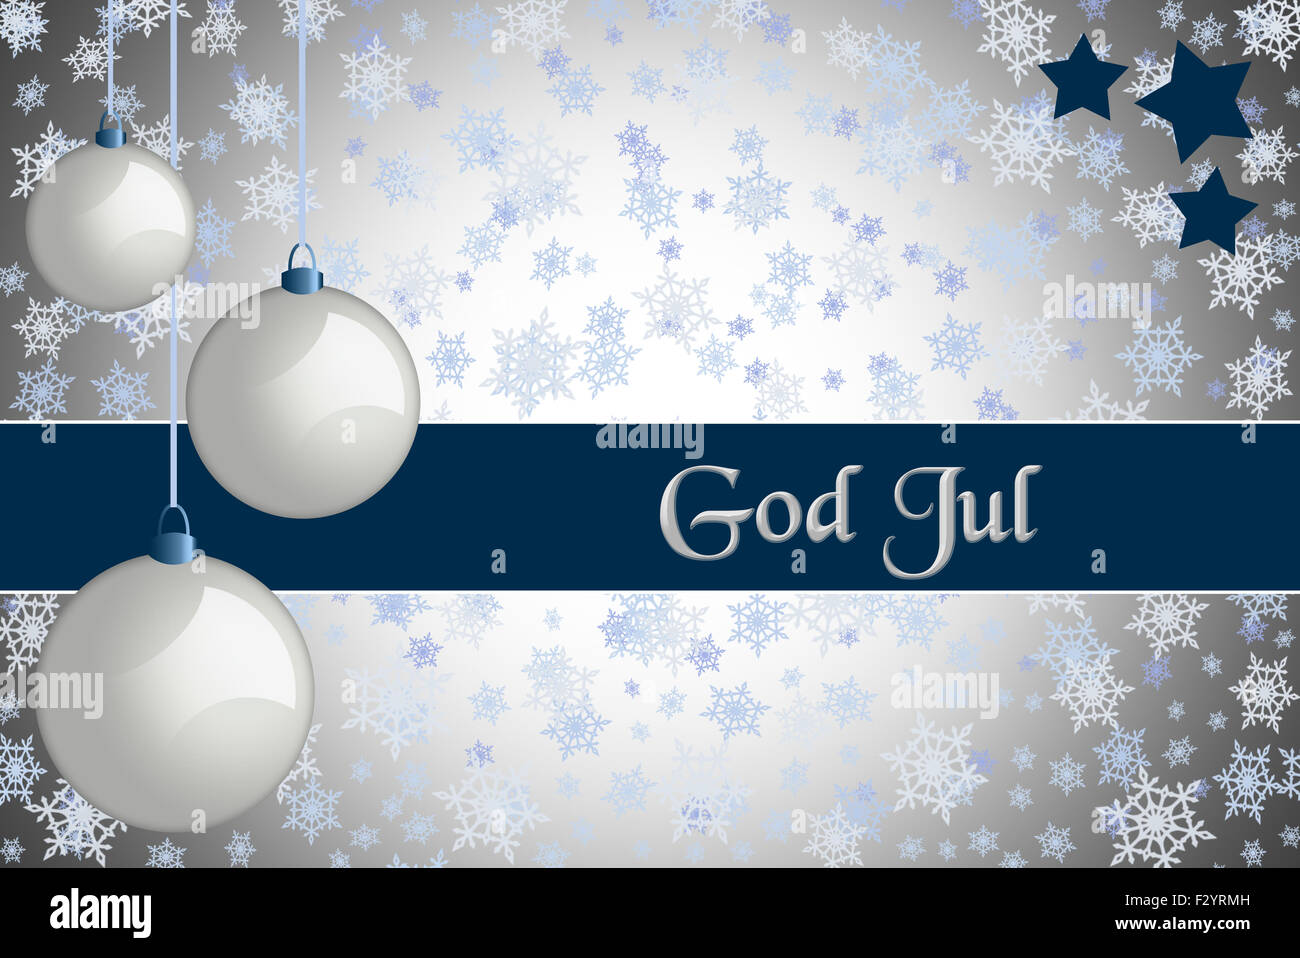 Christmas greeting card. 'God Jul' Silver colored Christmas card with retro white baubles and snowflake background. Stock Photo